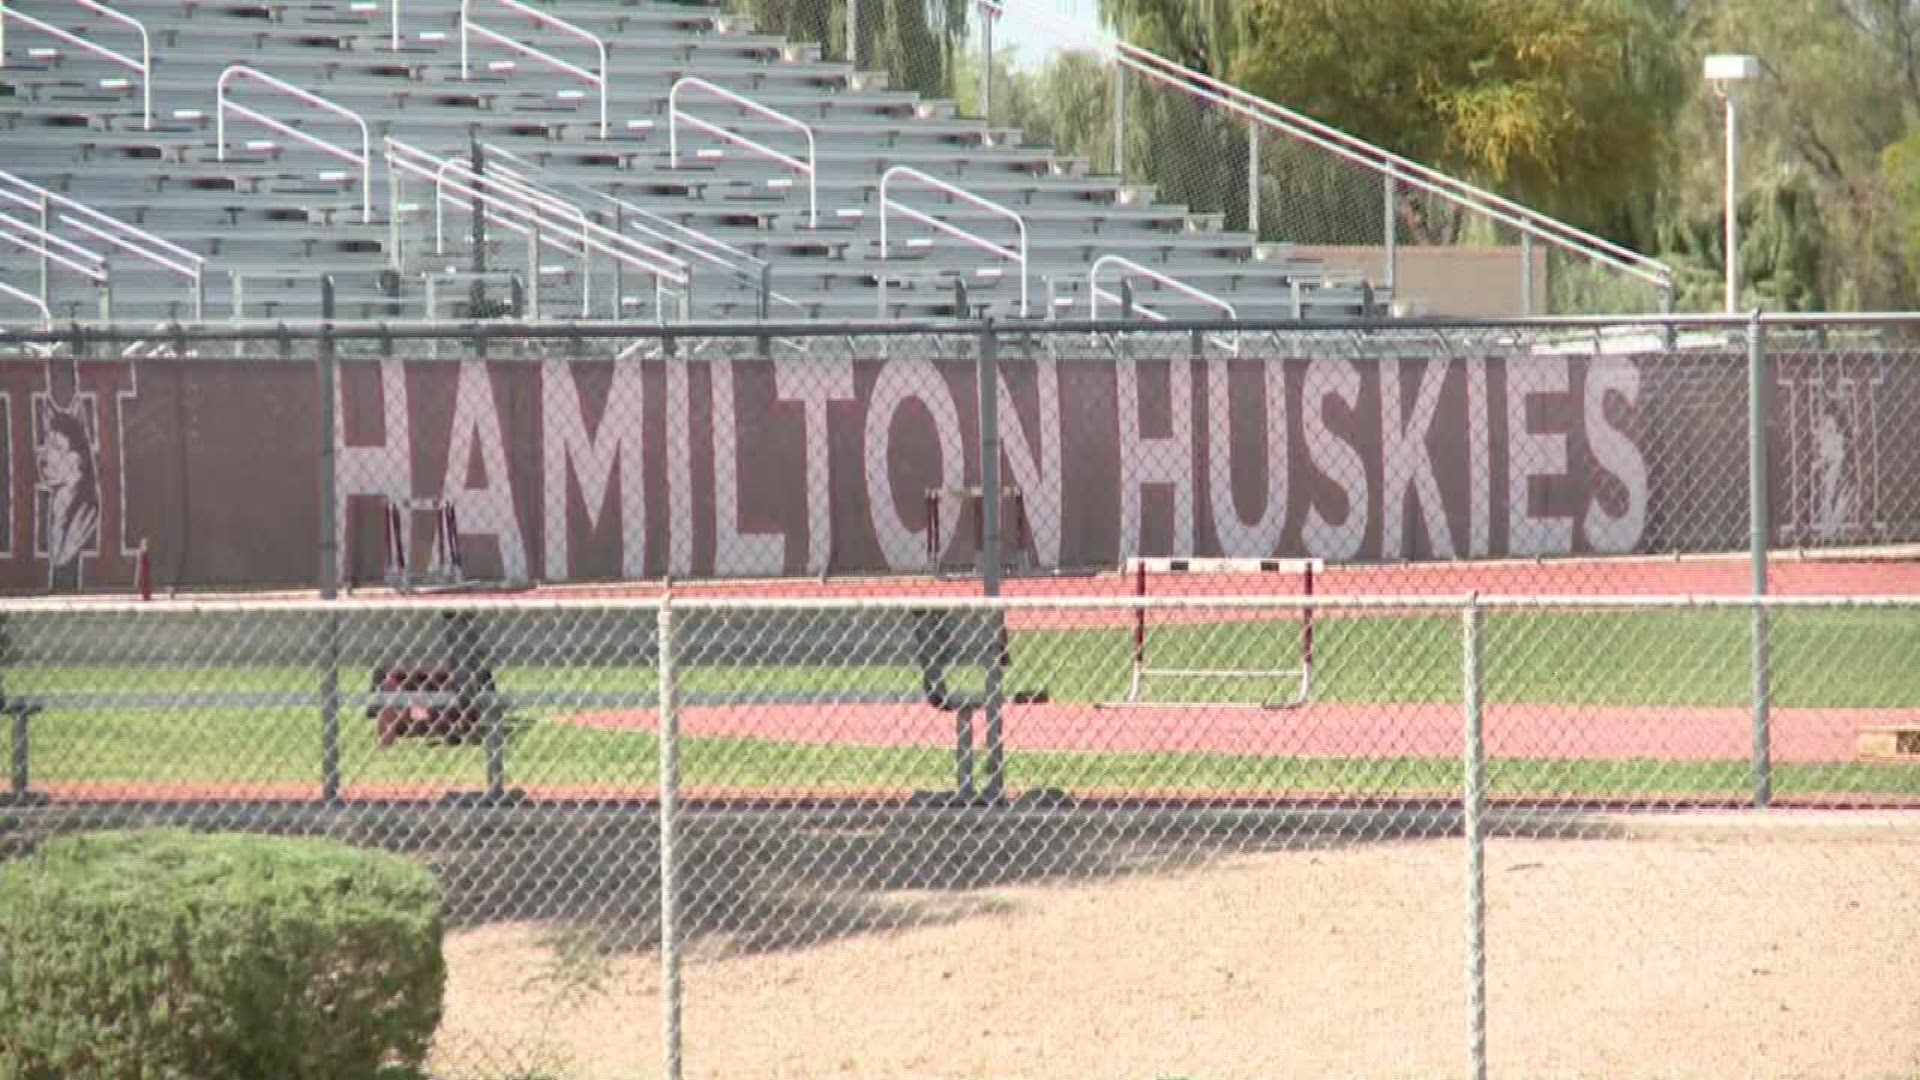 In light of the Hamilton High incident, we look at how rampant hazing is in high schools.